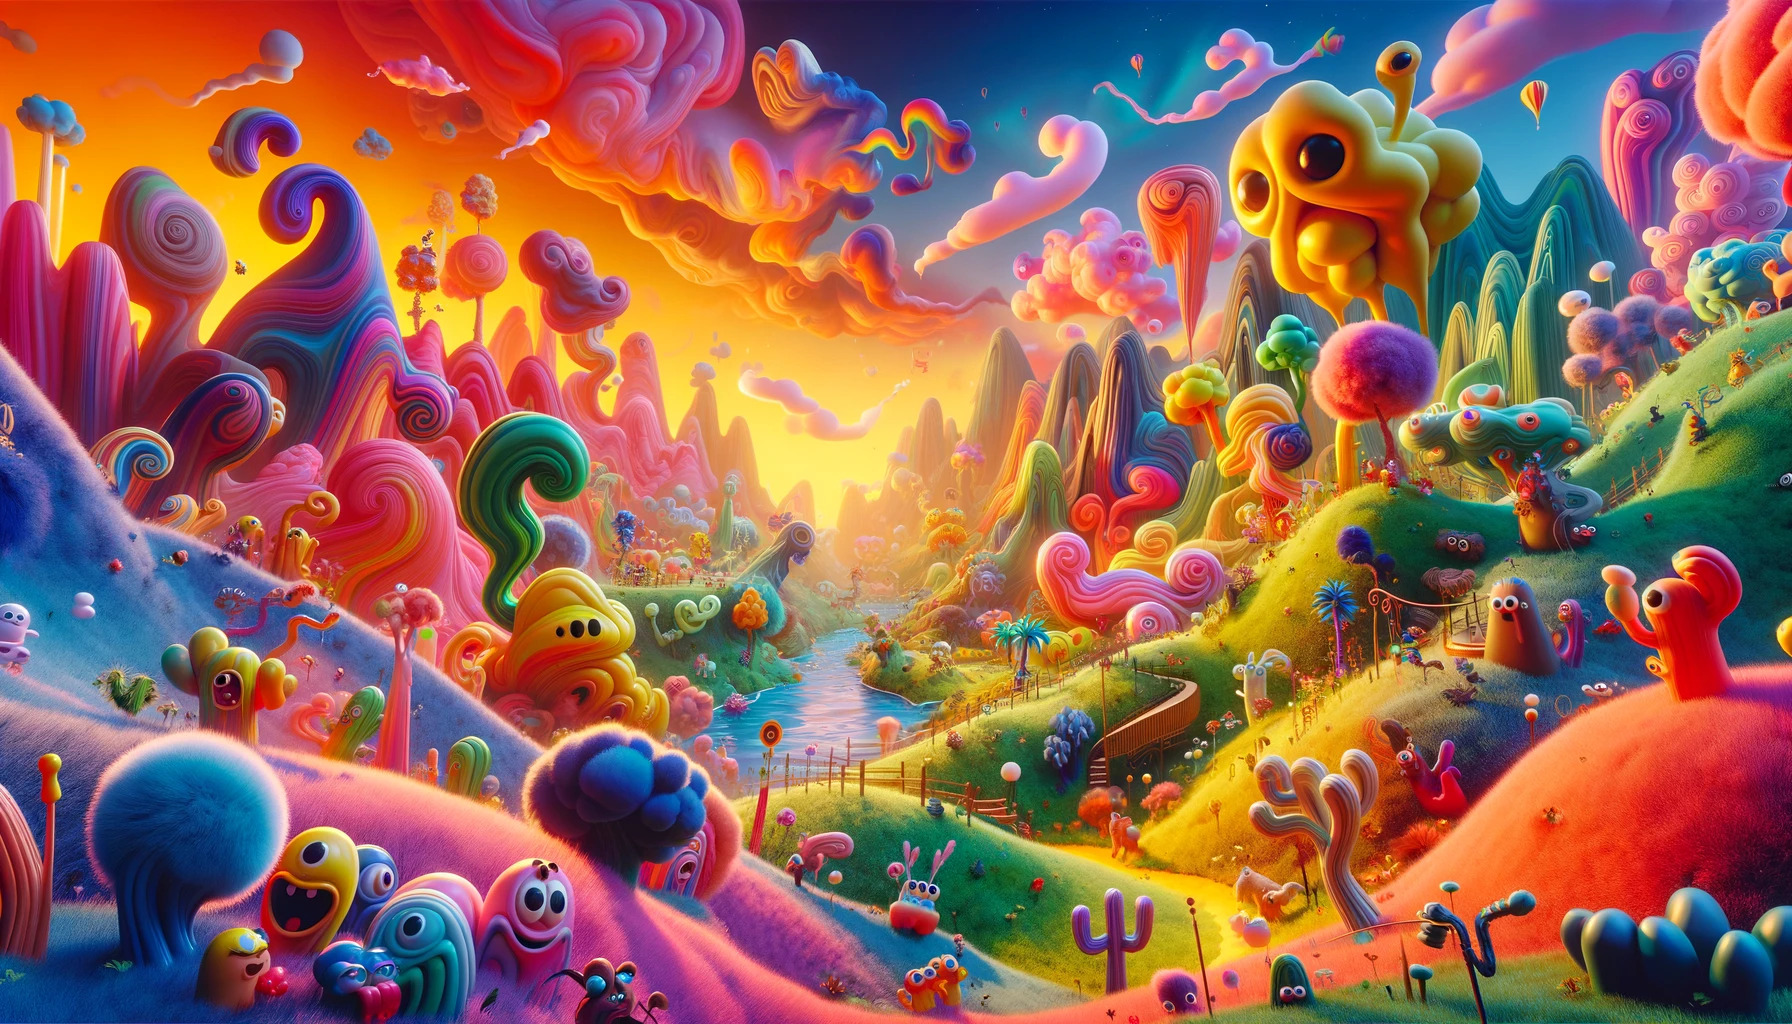 a whimsical, cinematic image inspired by the concept of "Goofy Ahh Names." Enjoy exploring the vibrant, cartoonish landscape filled with exaggerated, playful elements, quirky creatures, and a world alive with laughter and joy.